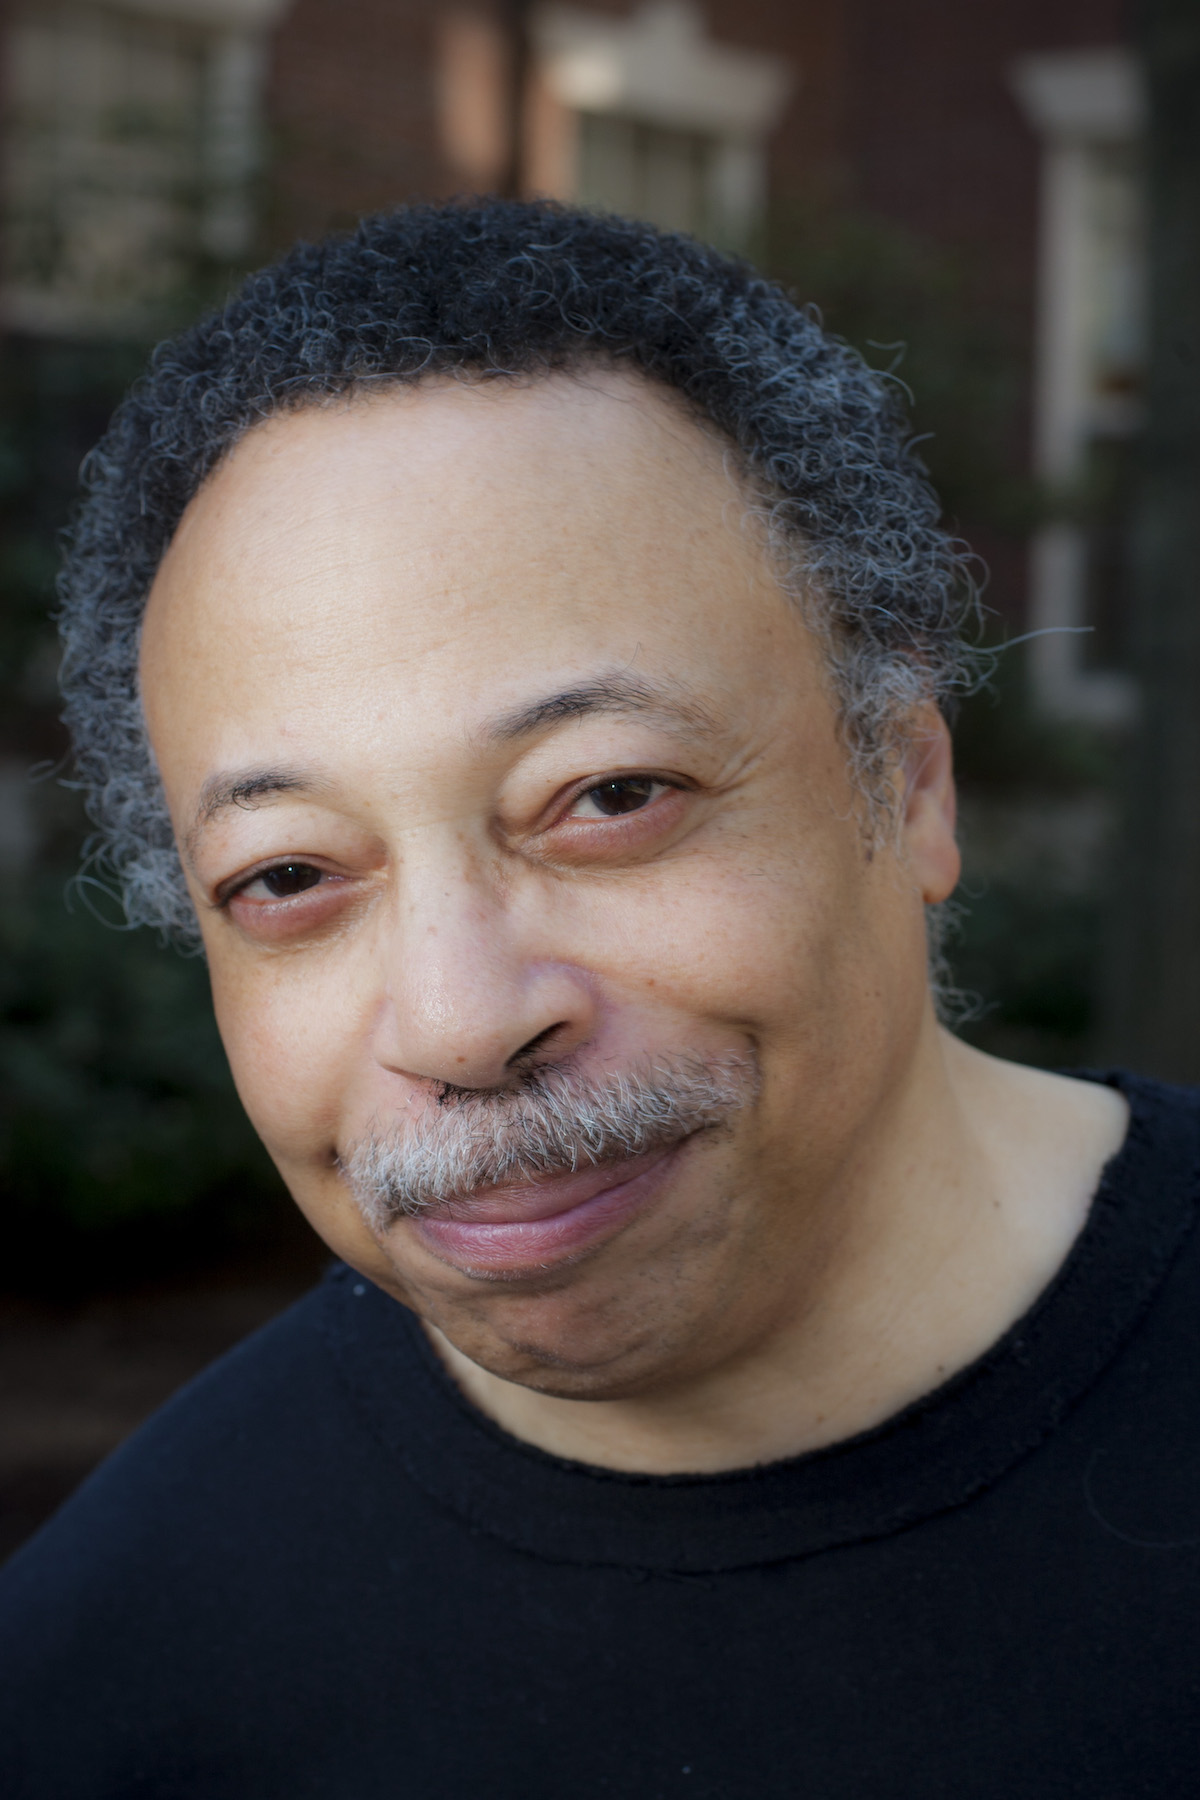 A photo of George Elliott Clarke. A Black man wearing a black shirt, he has a greying moustache and hair, and is smiling at the camera.